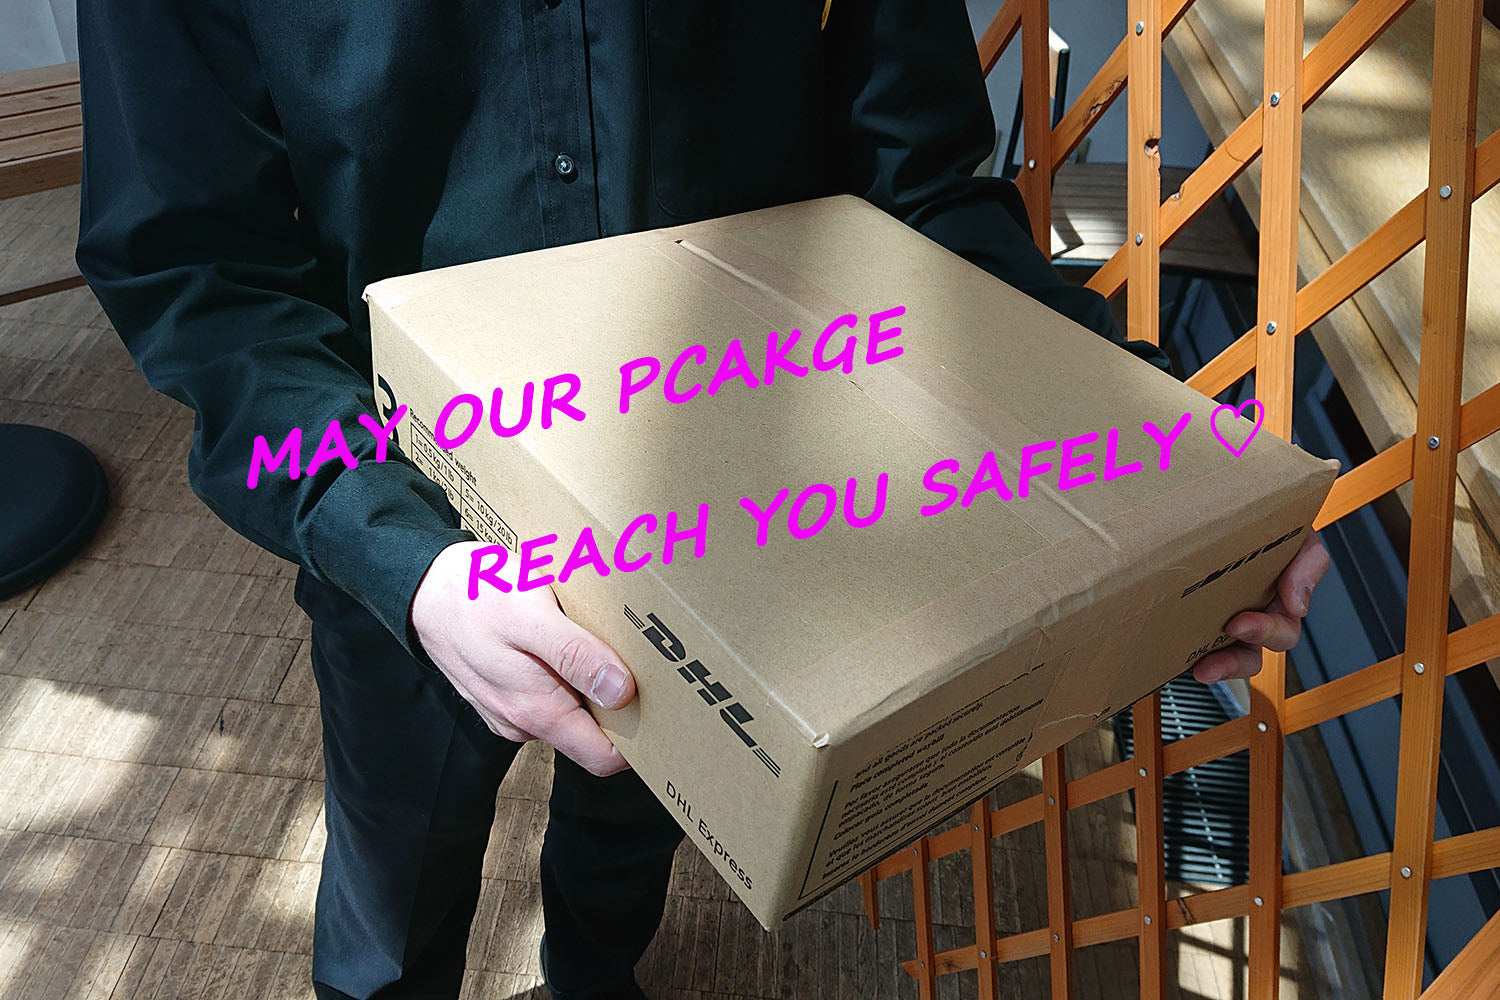 May our package reach you safely.